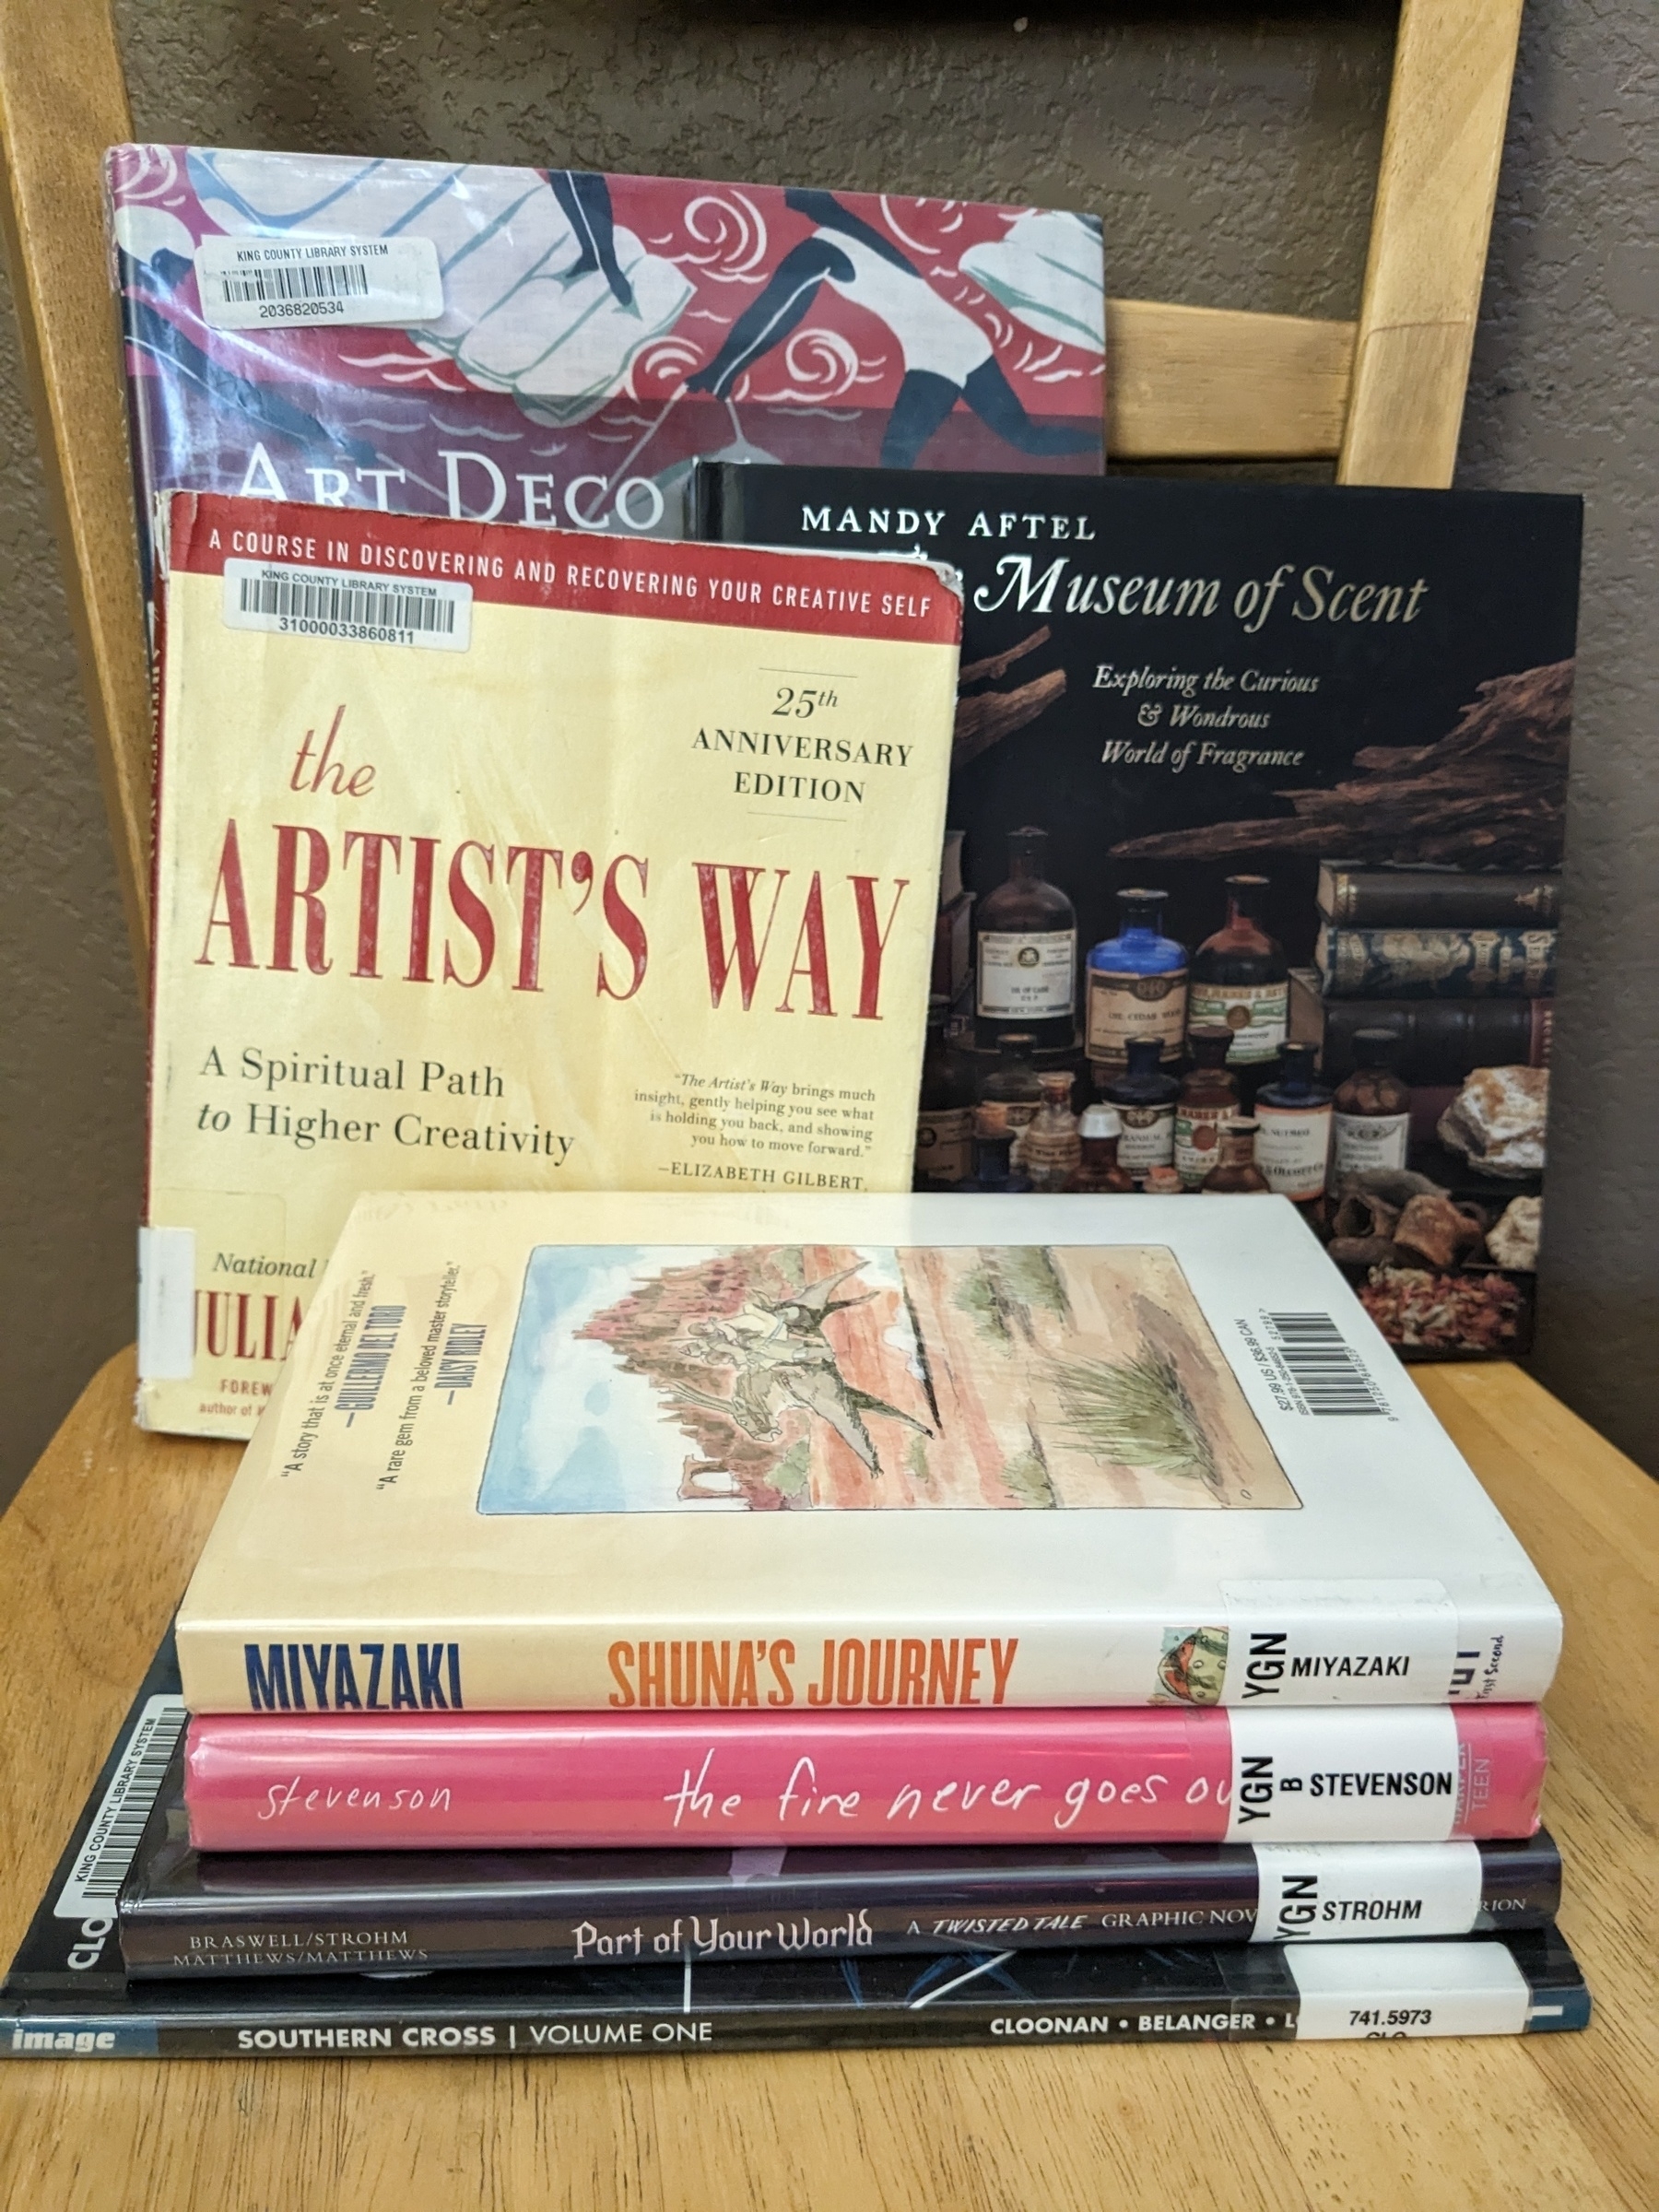 Four comics, two art books, and The Artist's Way